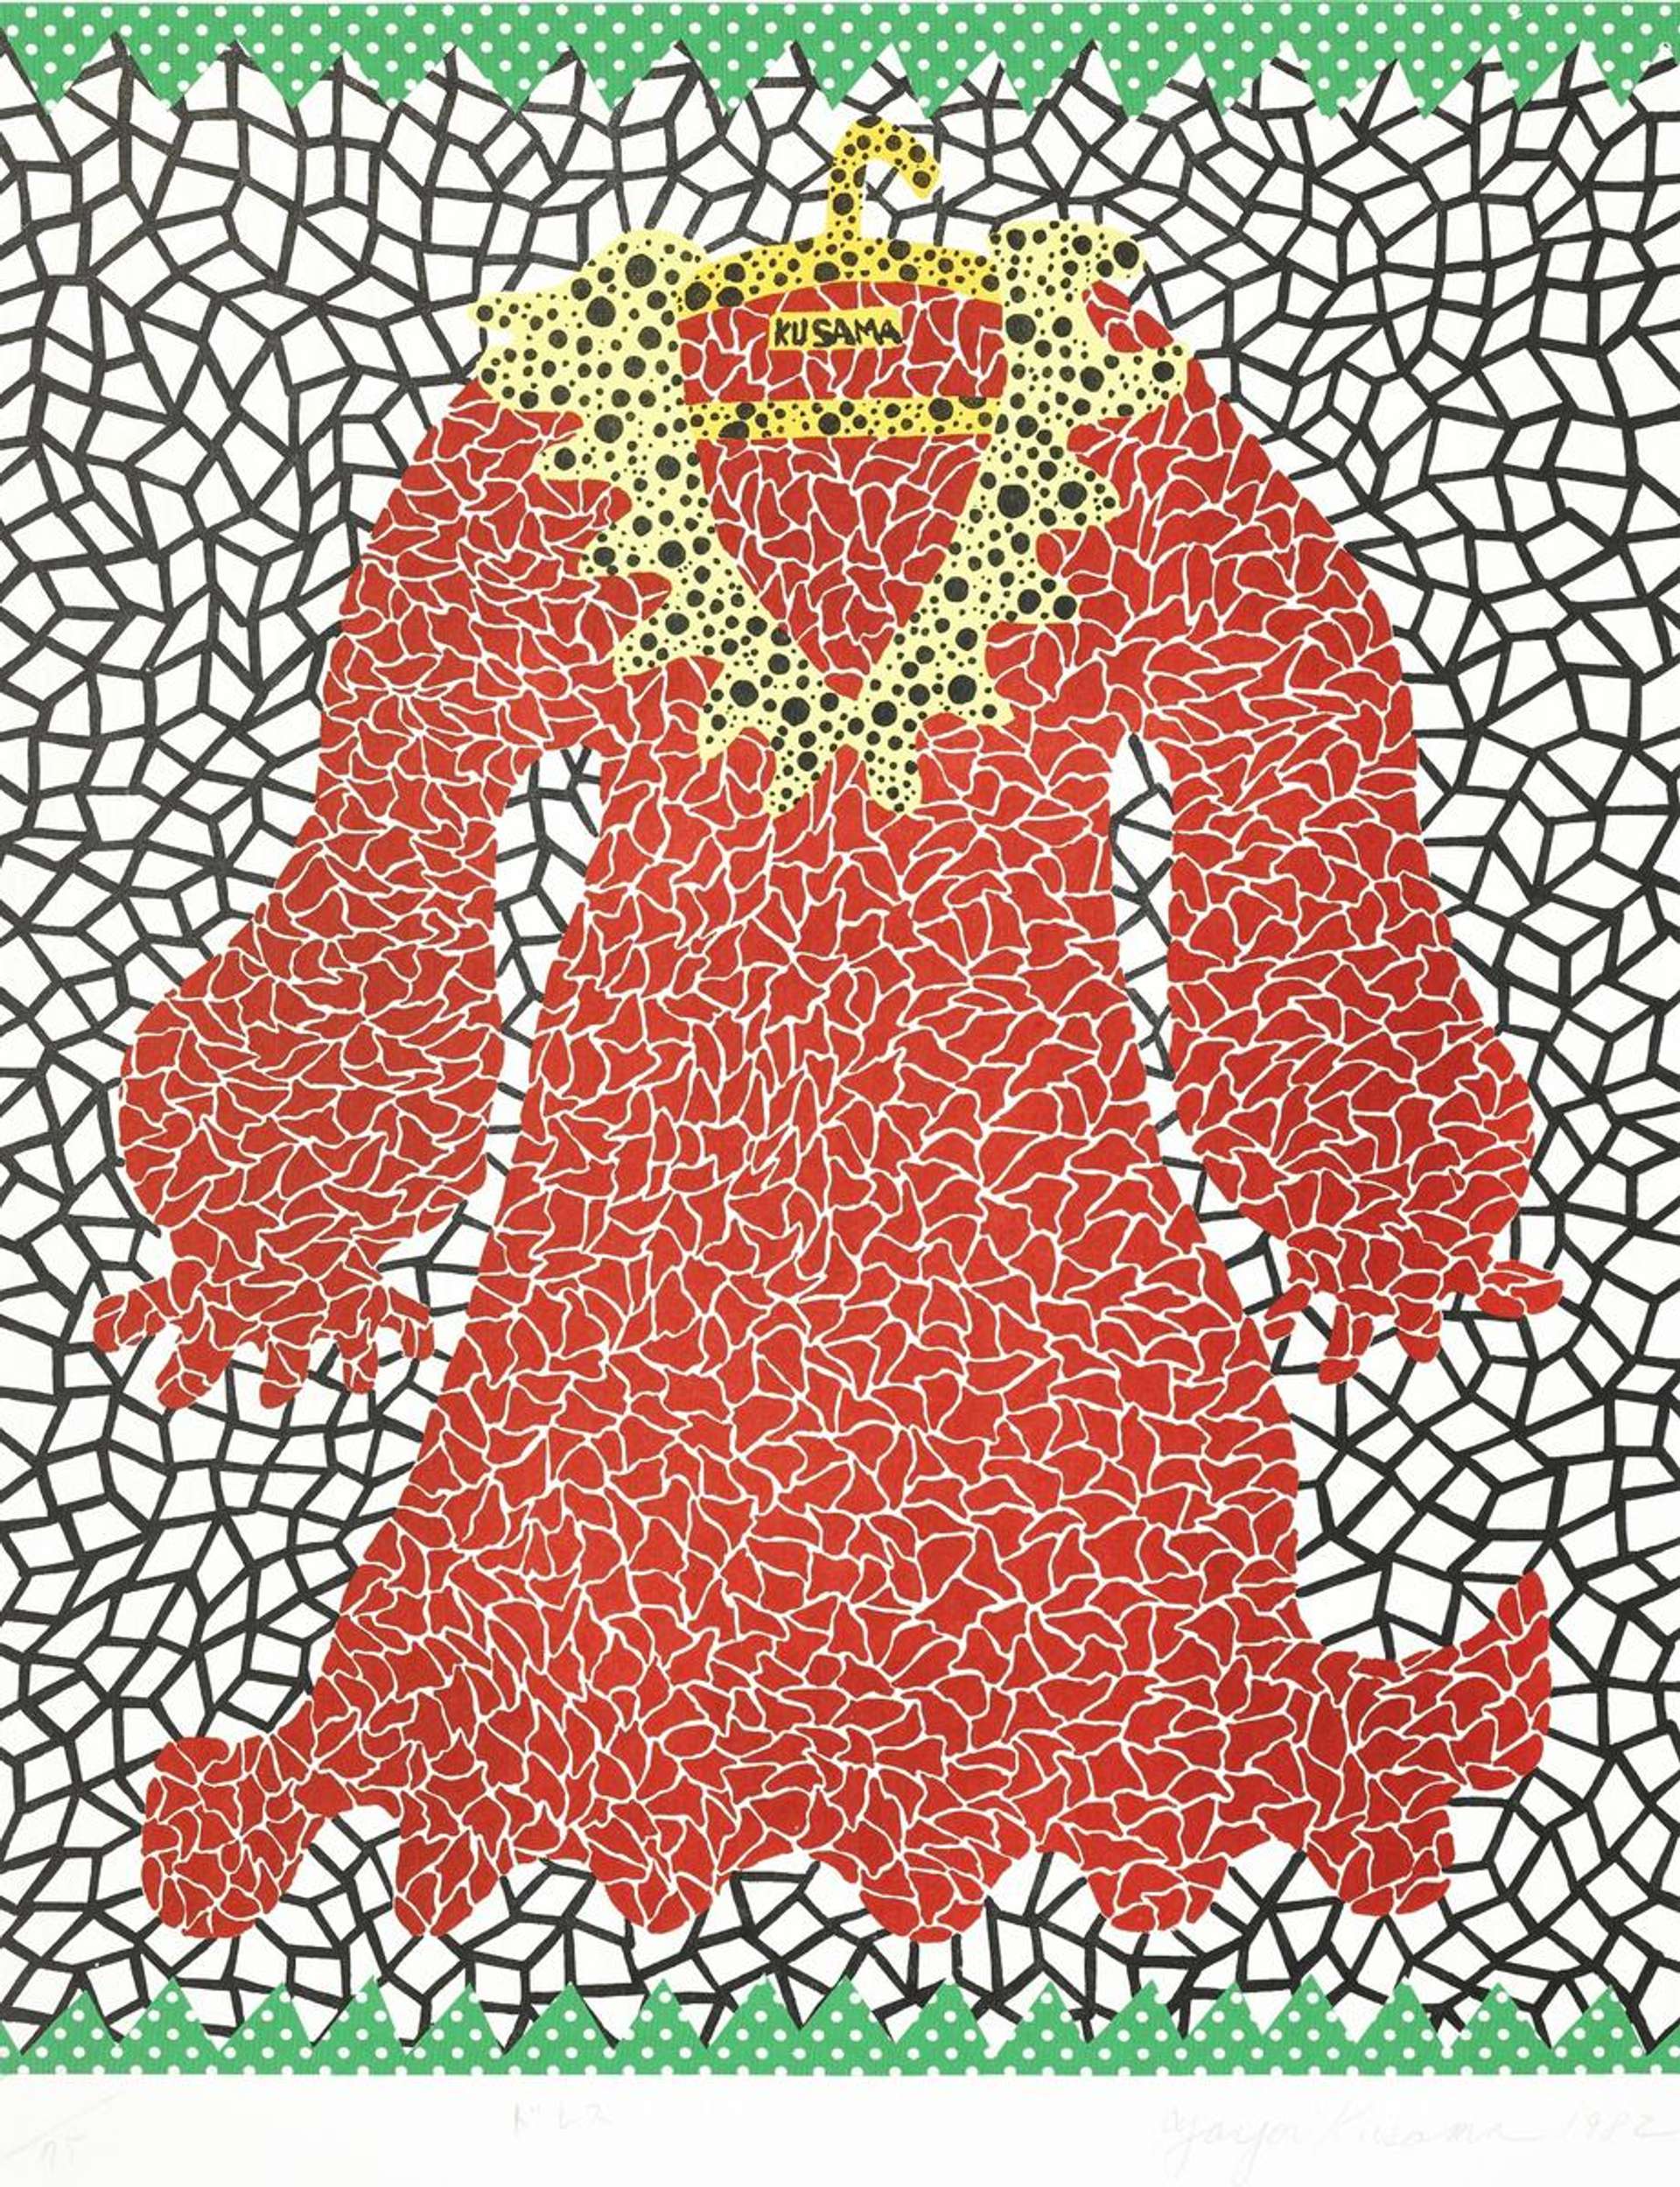 An image of a print by Yayoi Kusama, showing a dress rendered in mosaic-like style. The dress is orange and yellow against a black and white background. The dress tag reads "Kusama". The whole scene is framed by a green polka-dotted border.